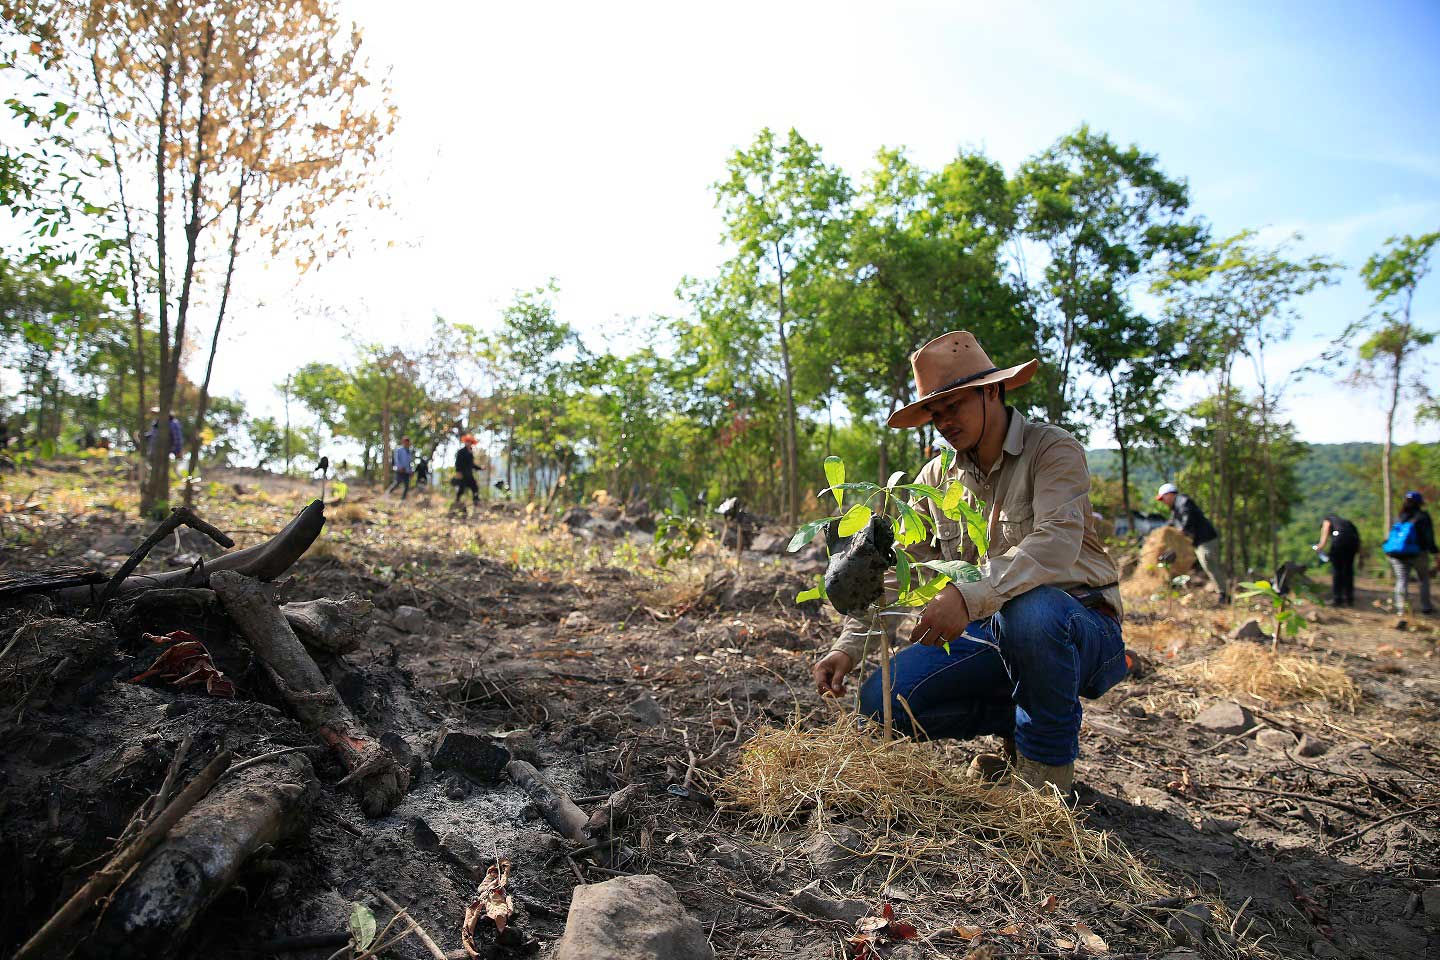 The Royal Forest Department joins forced with CPF to reforest Khao Phraya Doen Thong